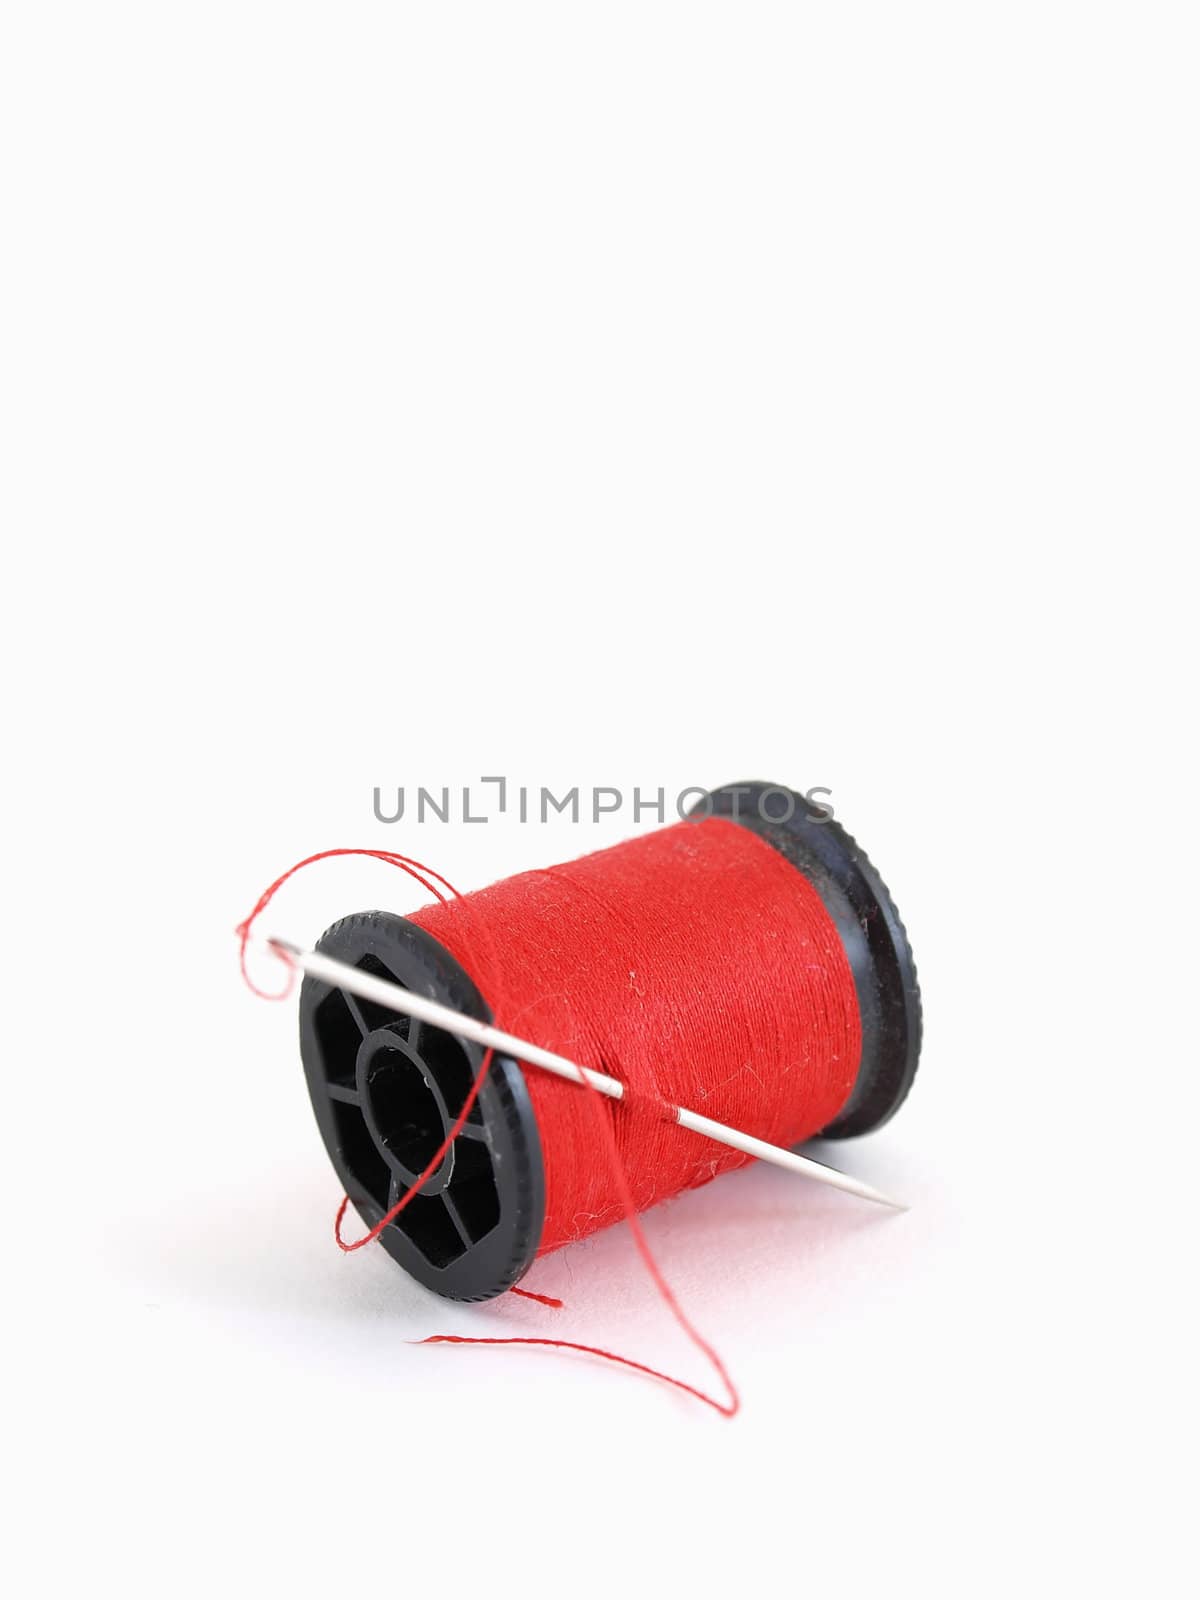 Spool and Red Thread by RGebbiePhoto